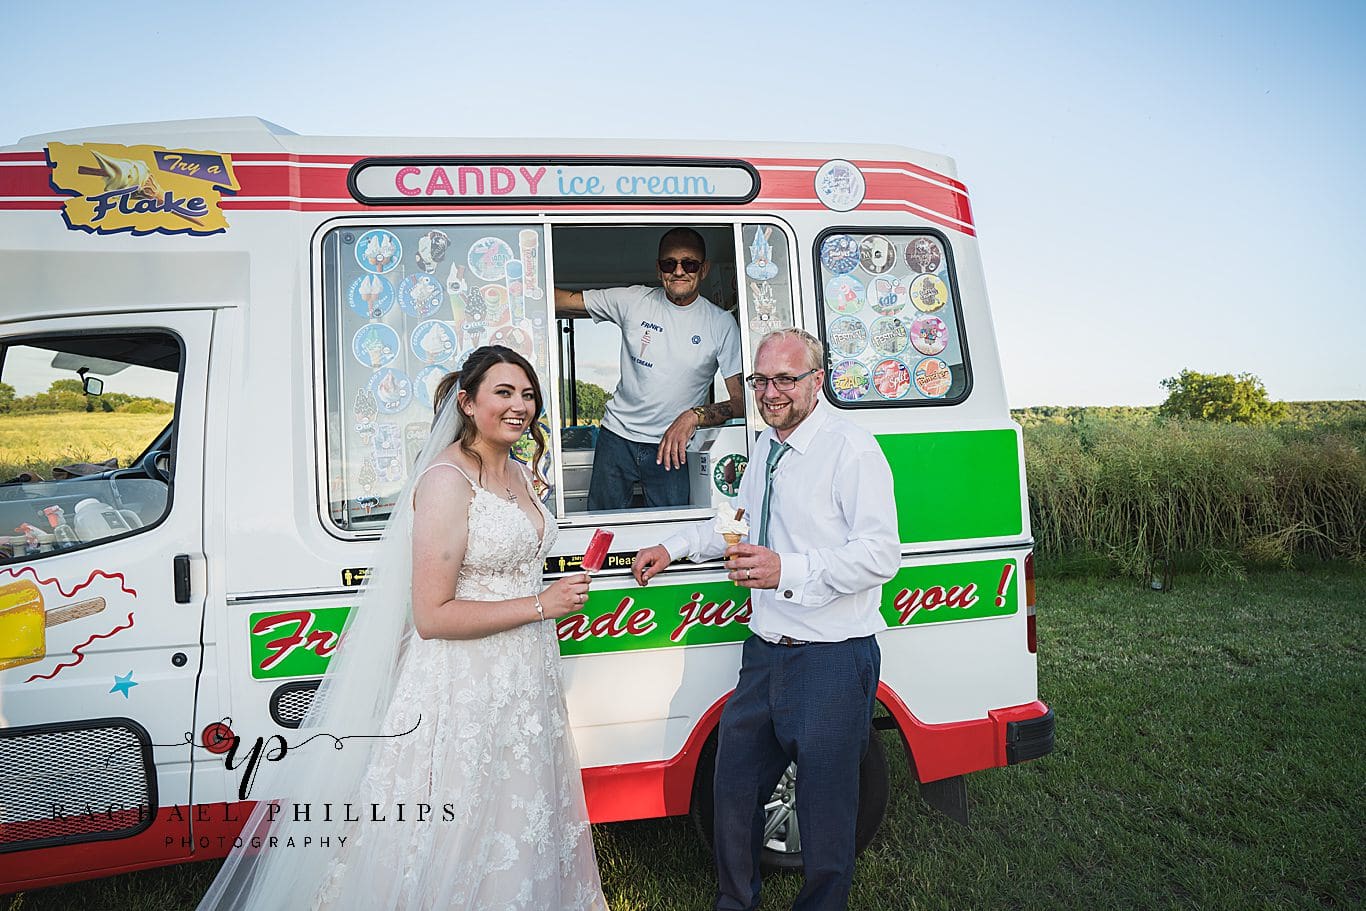 bride and groom outside the ice cream van on there wedding day eating ice-cream.